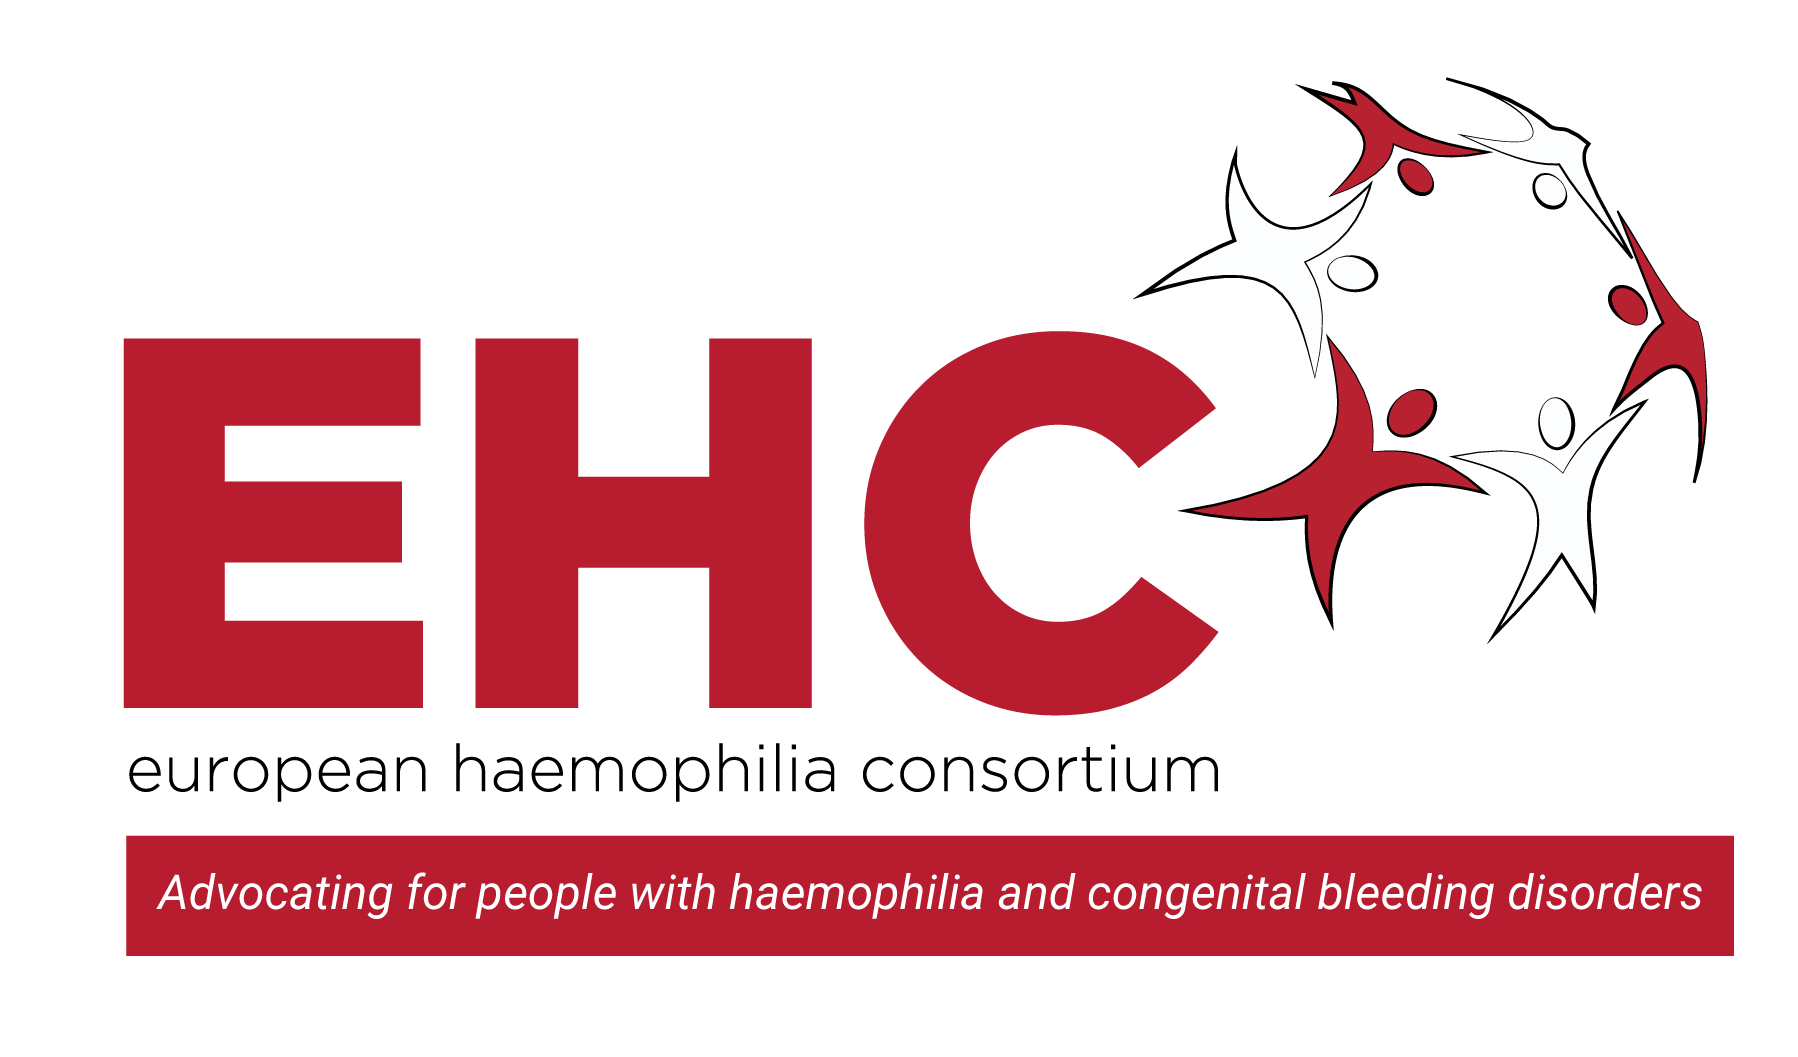 EHC – European Haemophilia Consortium - Advocating for people with haemophilia and congenital bleeding disorders - /events/ehc-round-table-2/